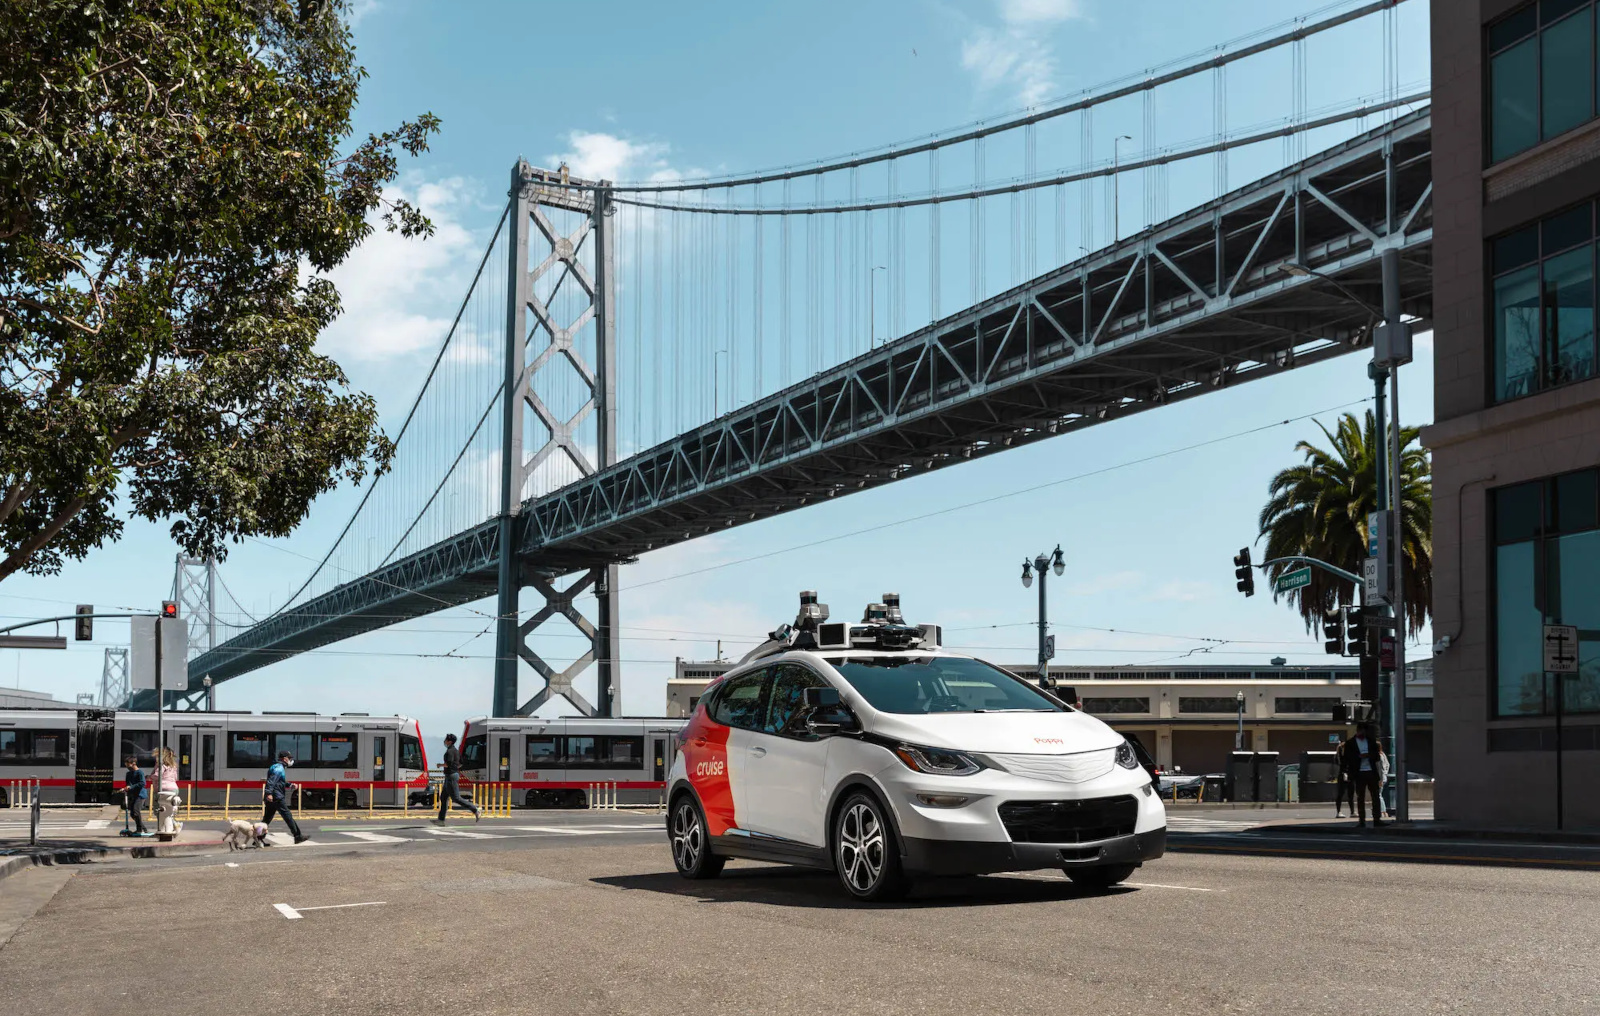 Cruise begins charging fares for its driverless taxi service in San Francisco